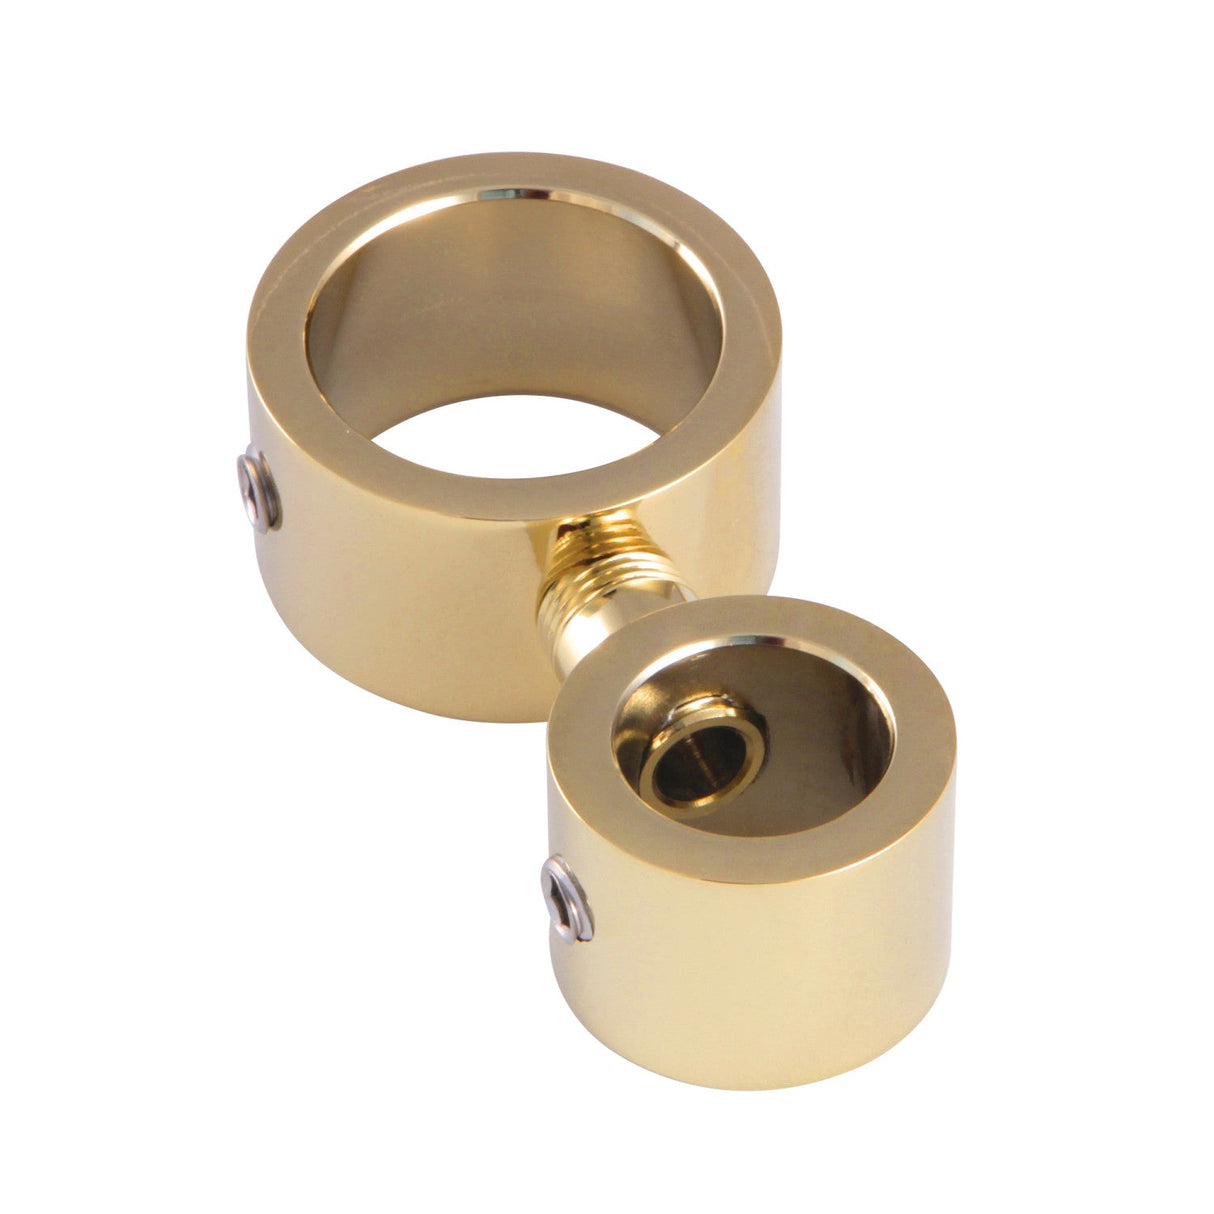 CS1582 1-Inch x 5/8-Inch Shower Riser Connector, Polished Brass